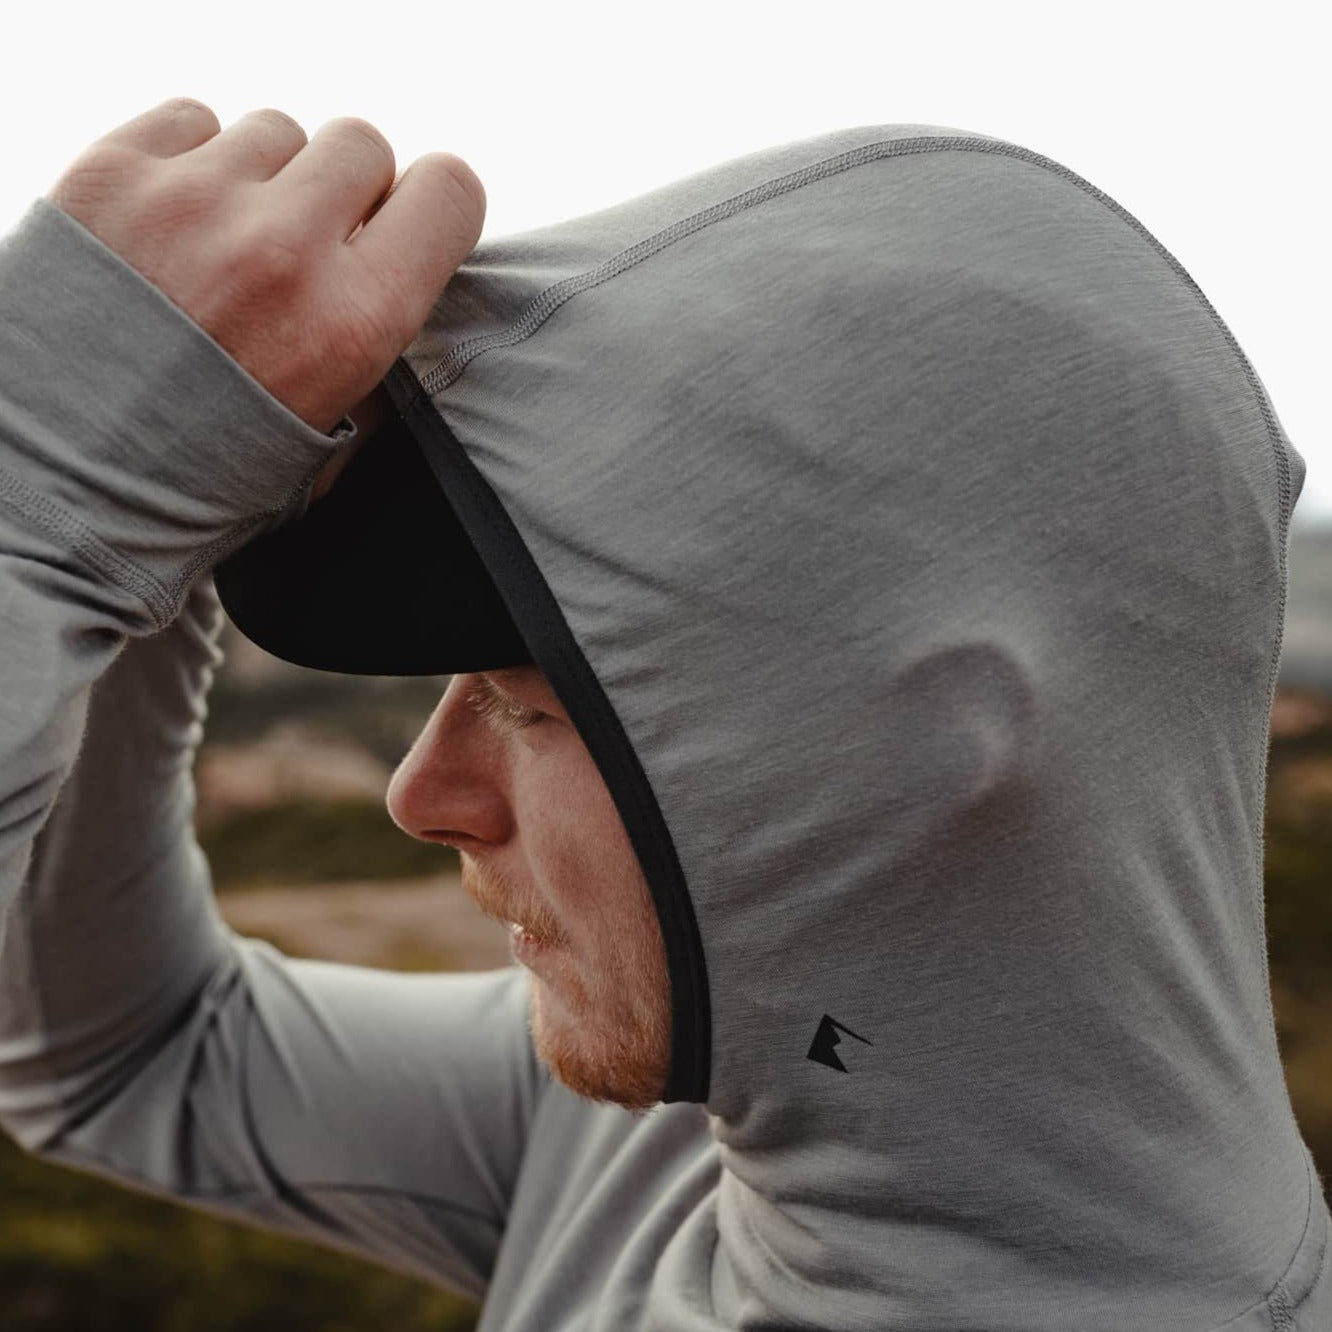 A man adjusts the Pursuit ultralight hoodie hood over his hat